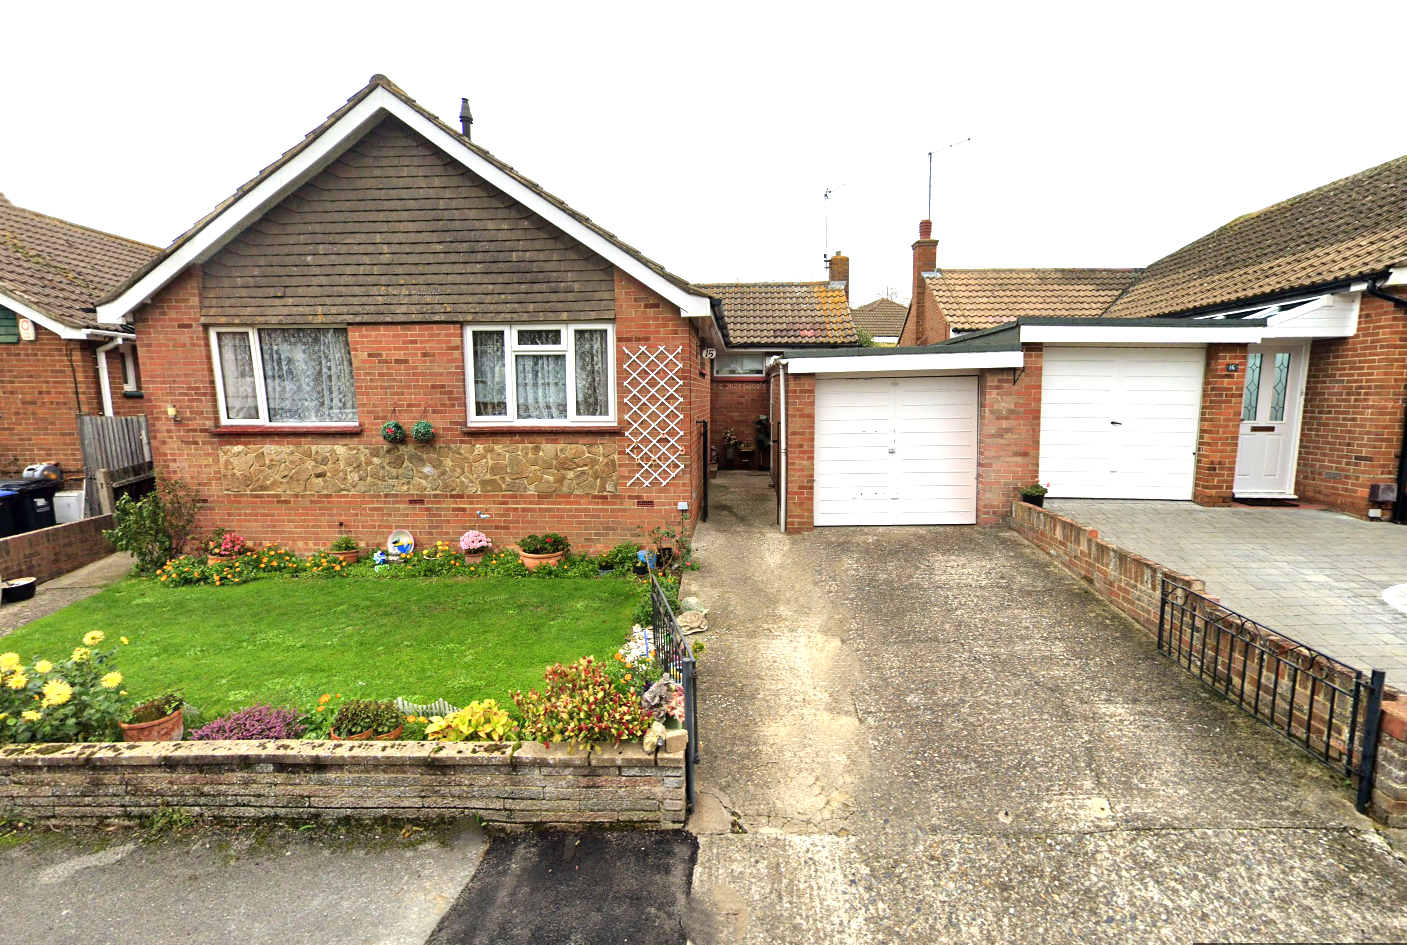 Two bedroom bungalow placed in a quiet cul-de-sac within Broadstairs offered CHAIN FREE